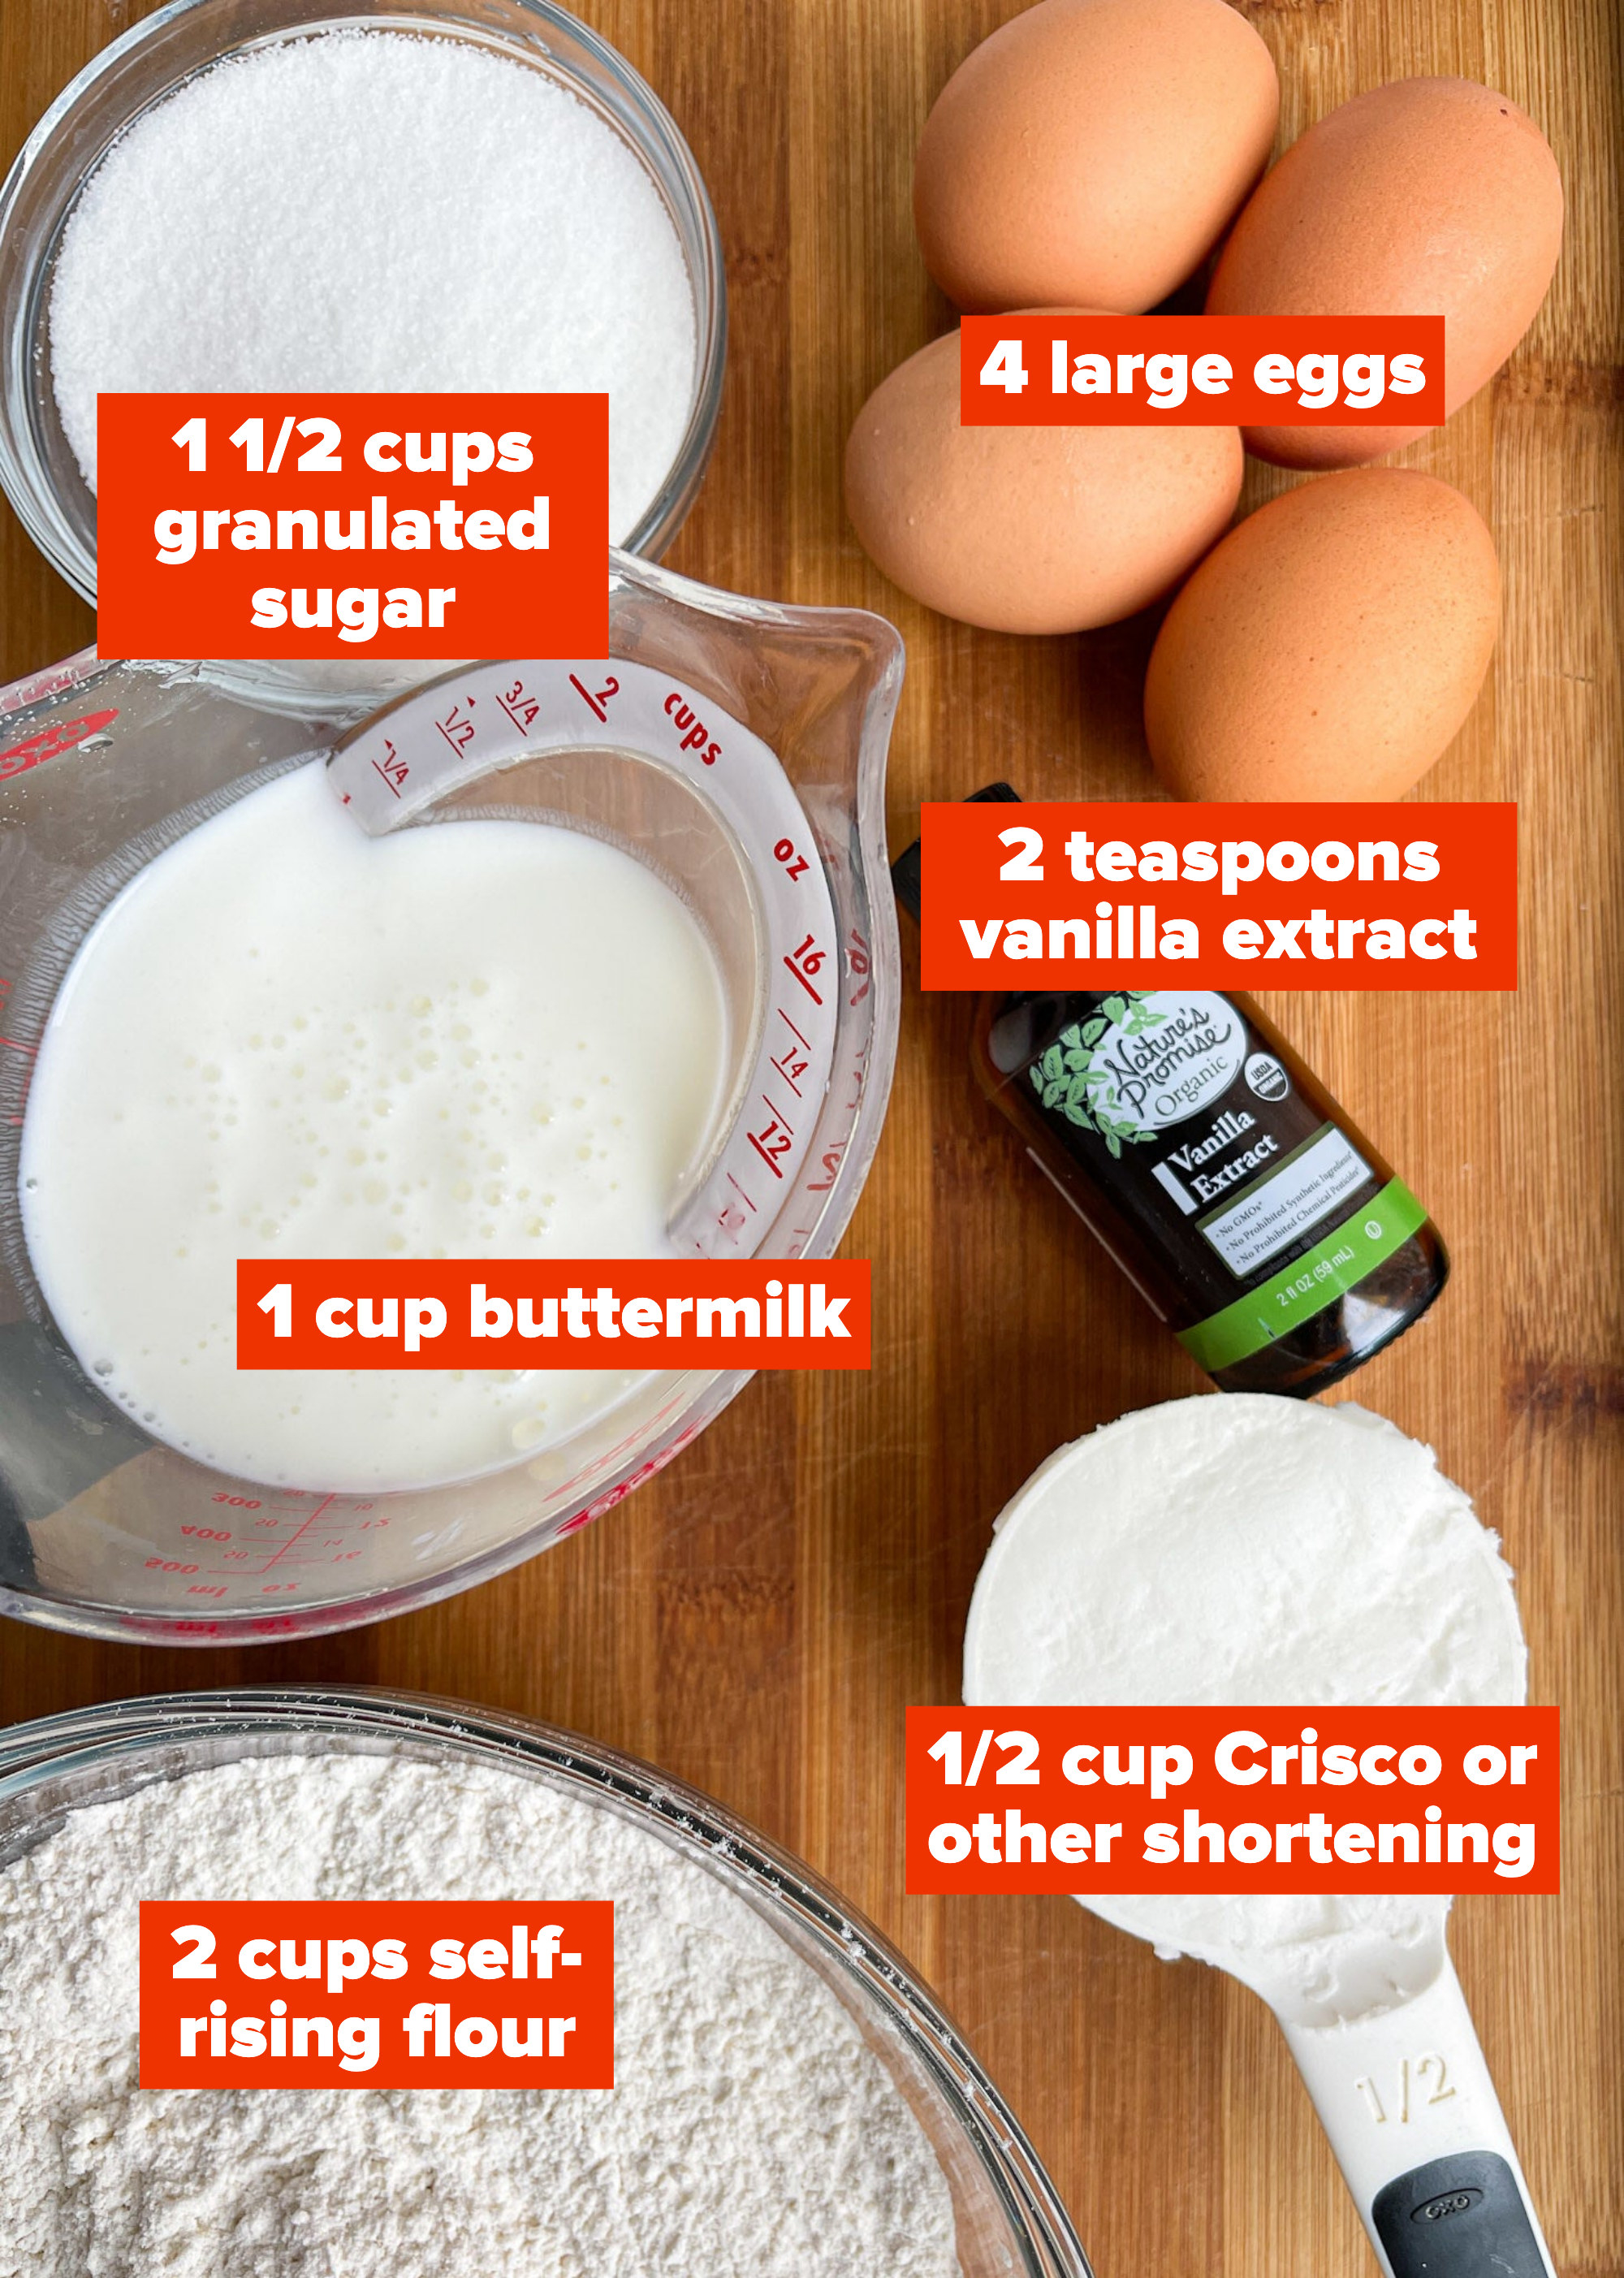 1 1/2 cups granulated sugar, 4 large eggs, 2 teaspoons vanilla extract, 1 cup buttermilk, 1/2 cup crisco or other shortening, 2 cups self-rising flour